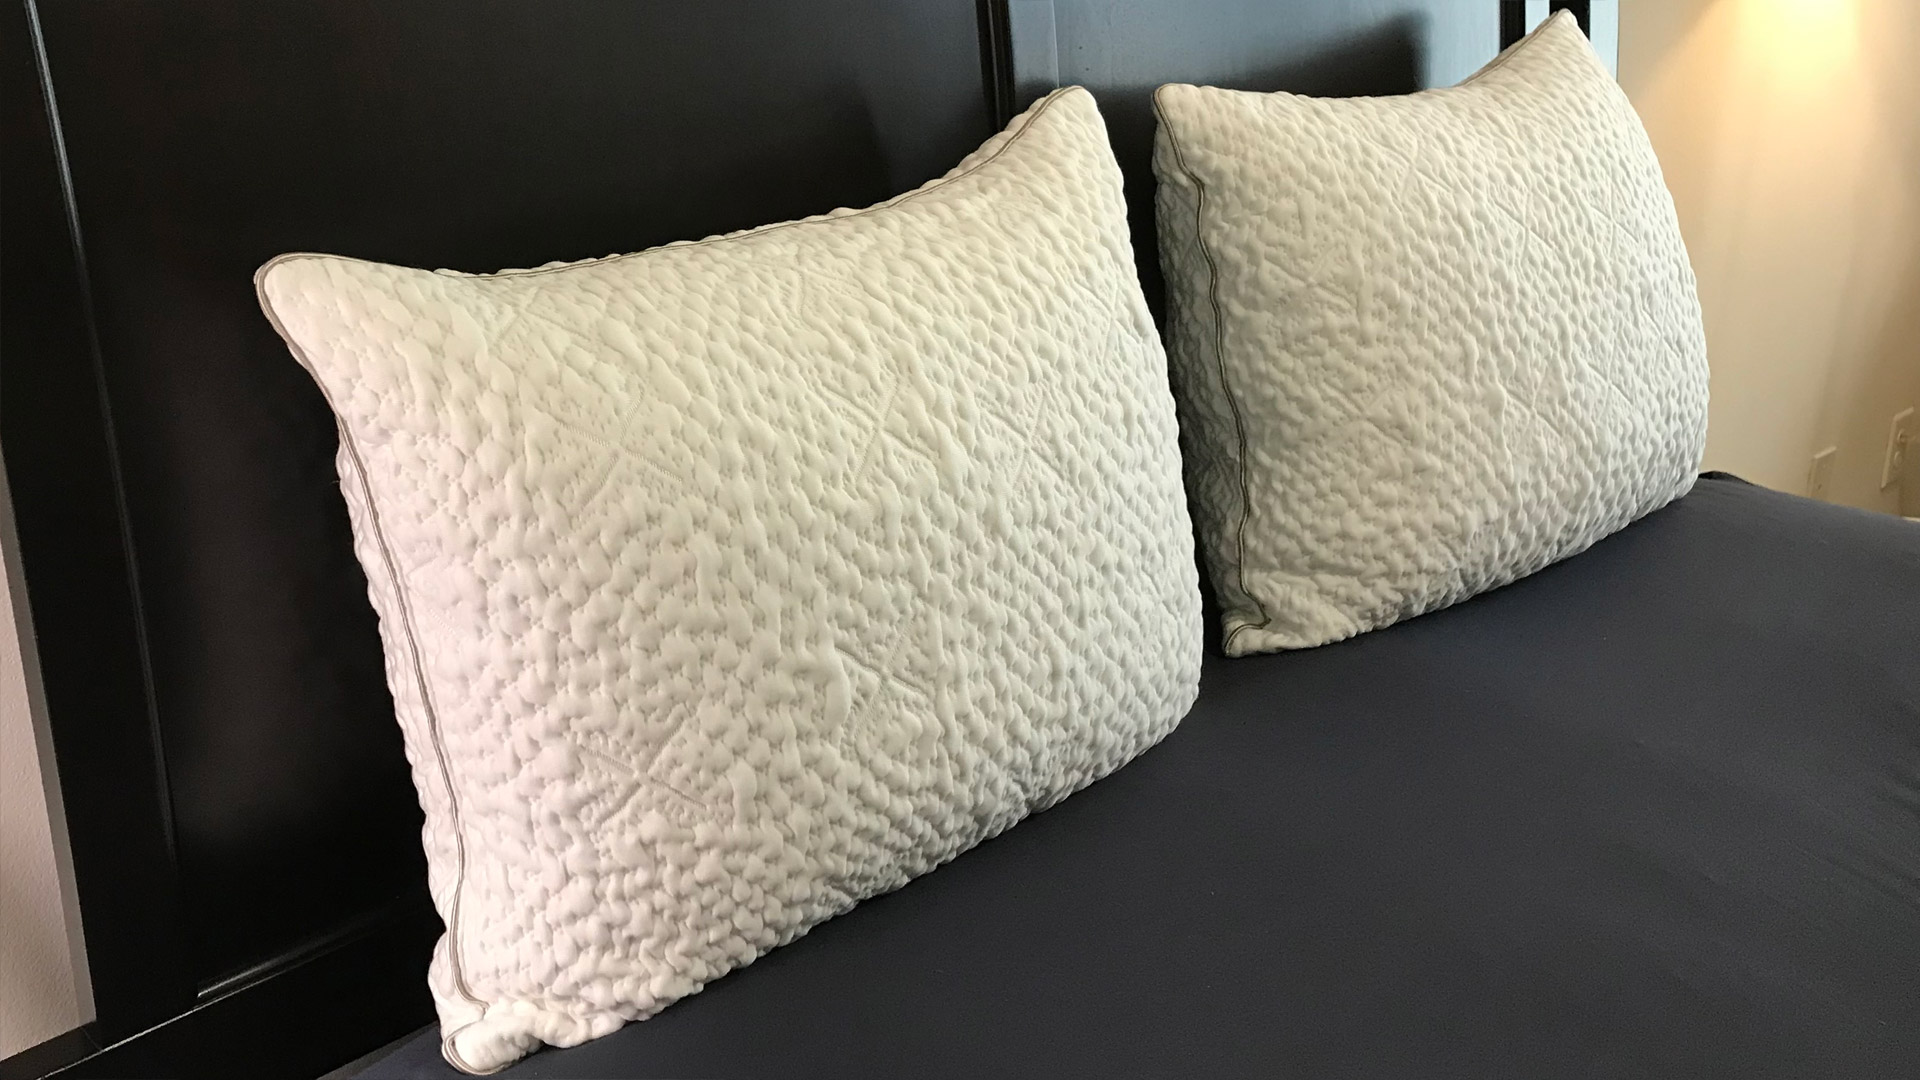 Two Two Sleep Number ComfortFit Pillows side by side on a bed